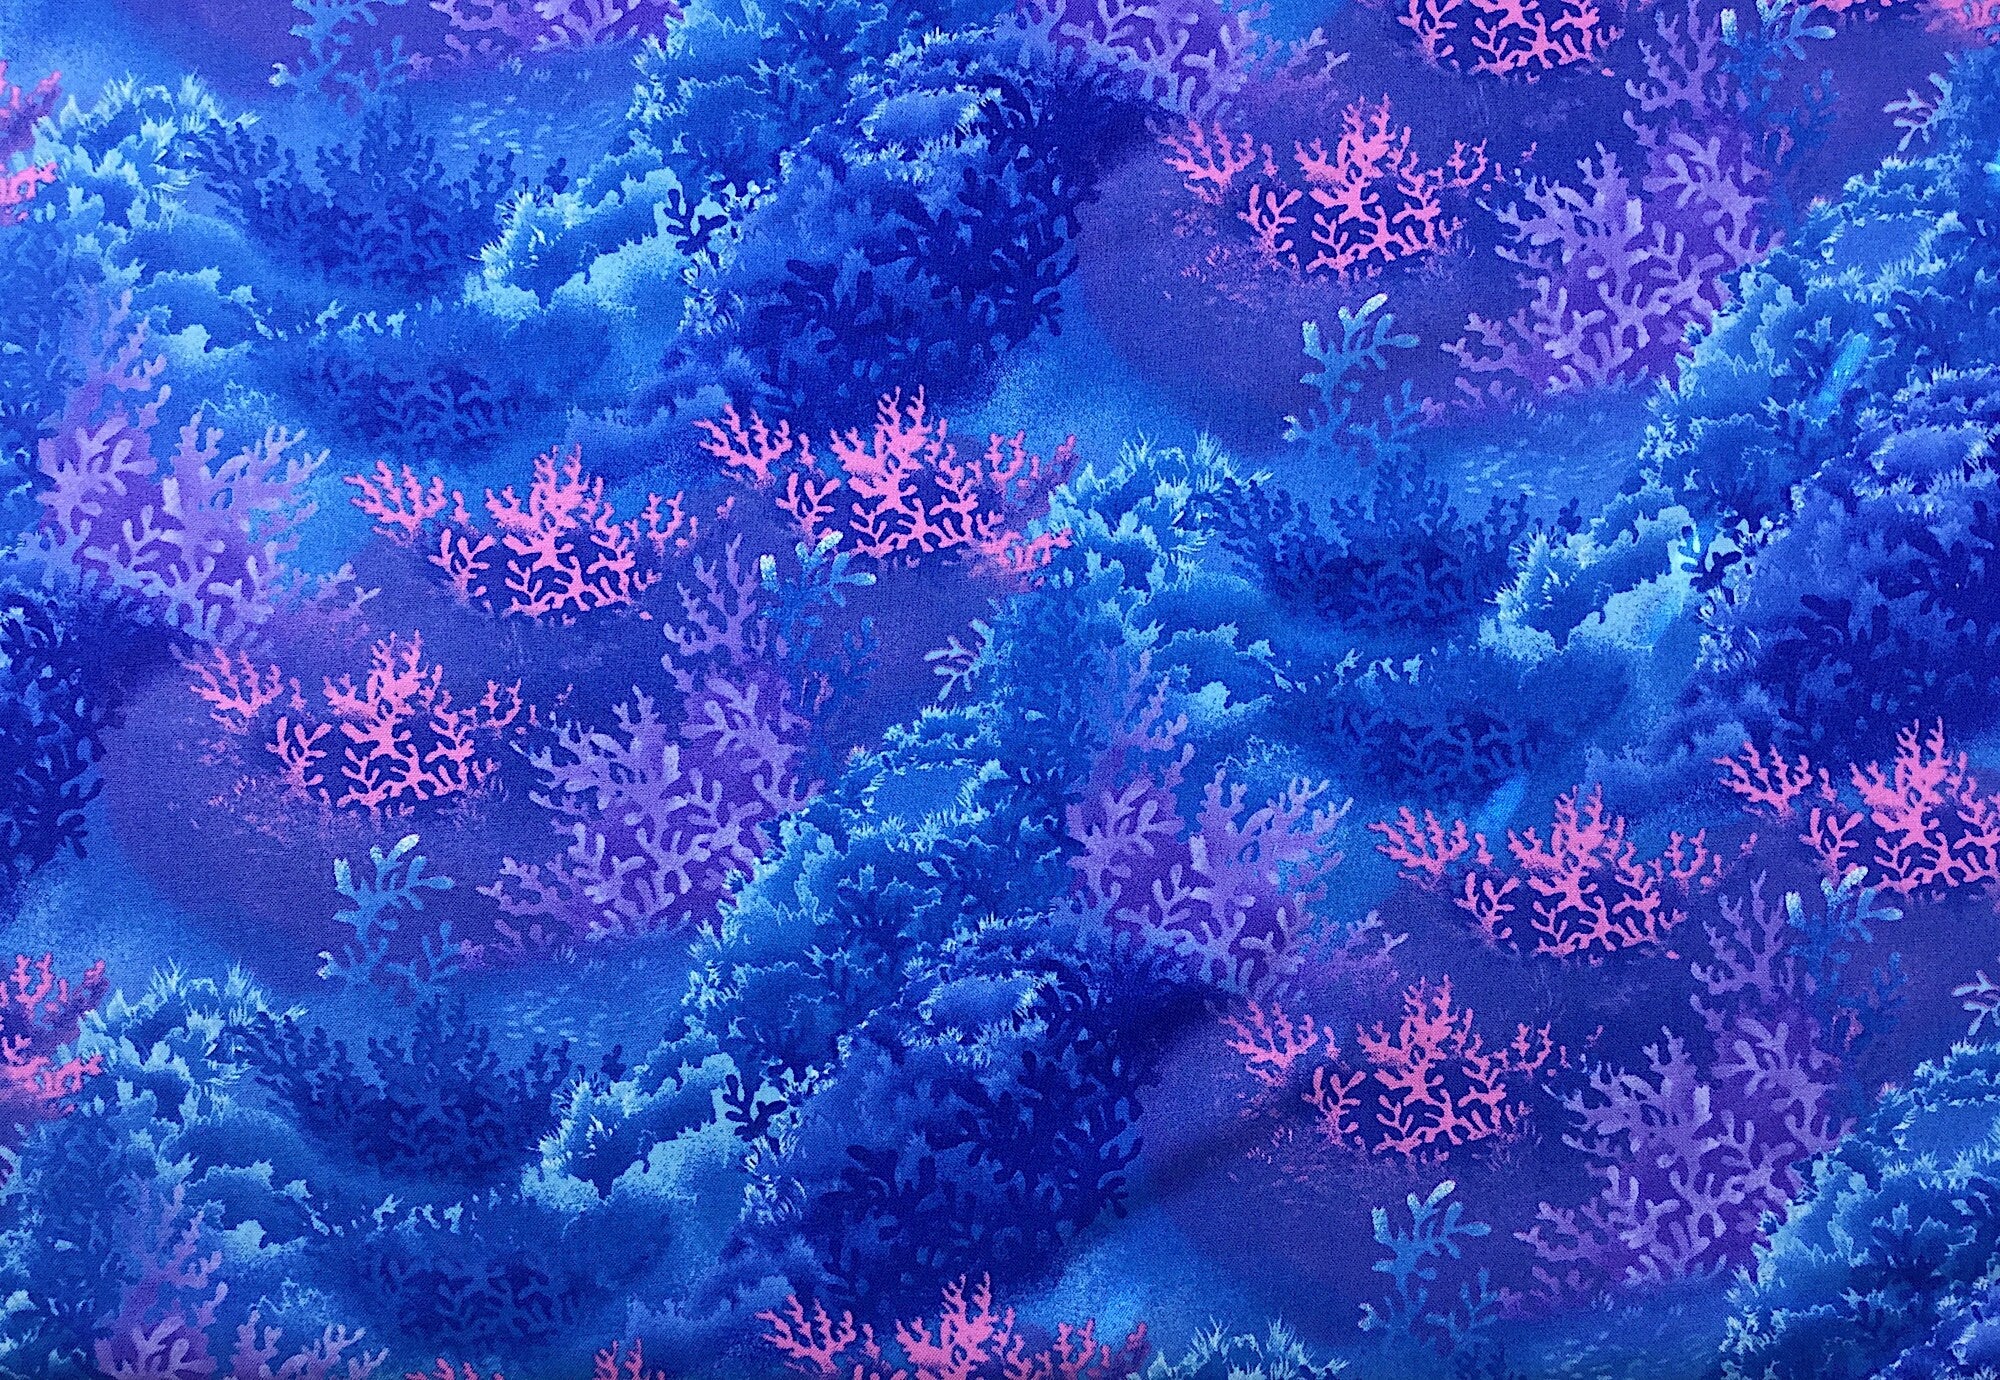 This fabric is called sea world and is covered in coral in shades of blue, pink and purples